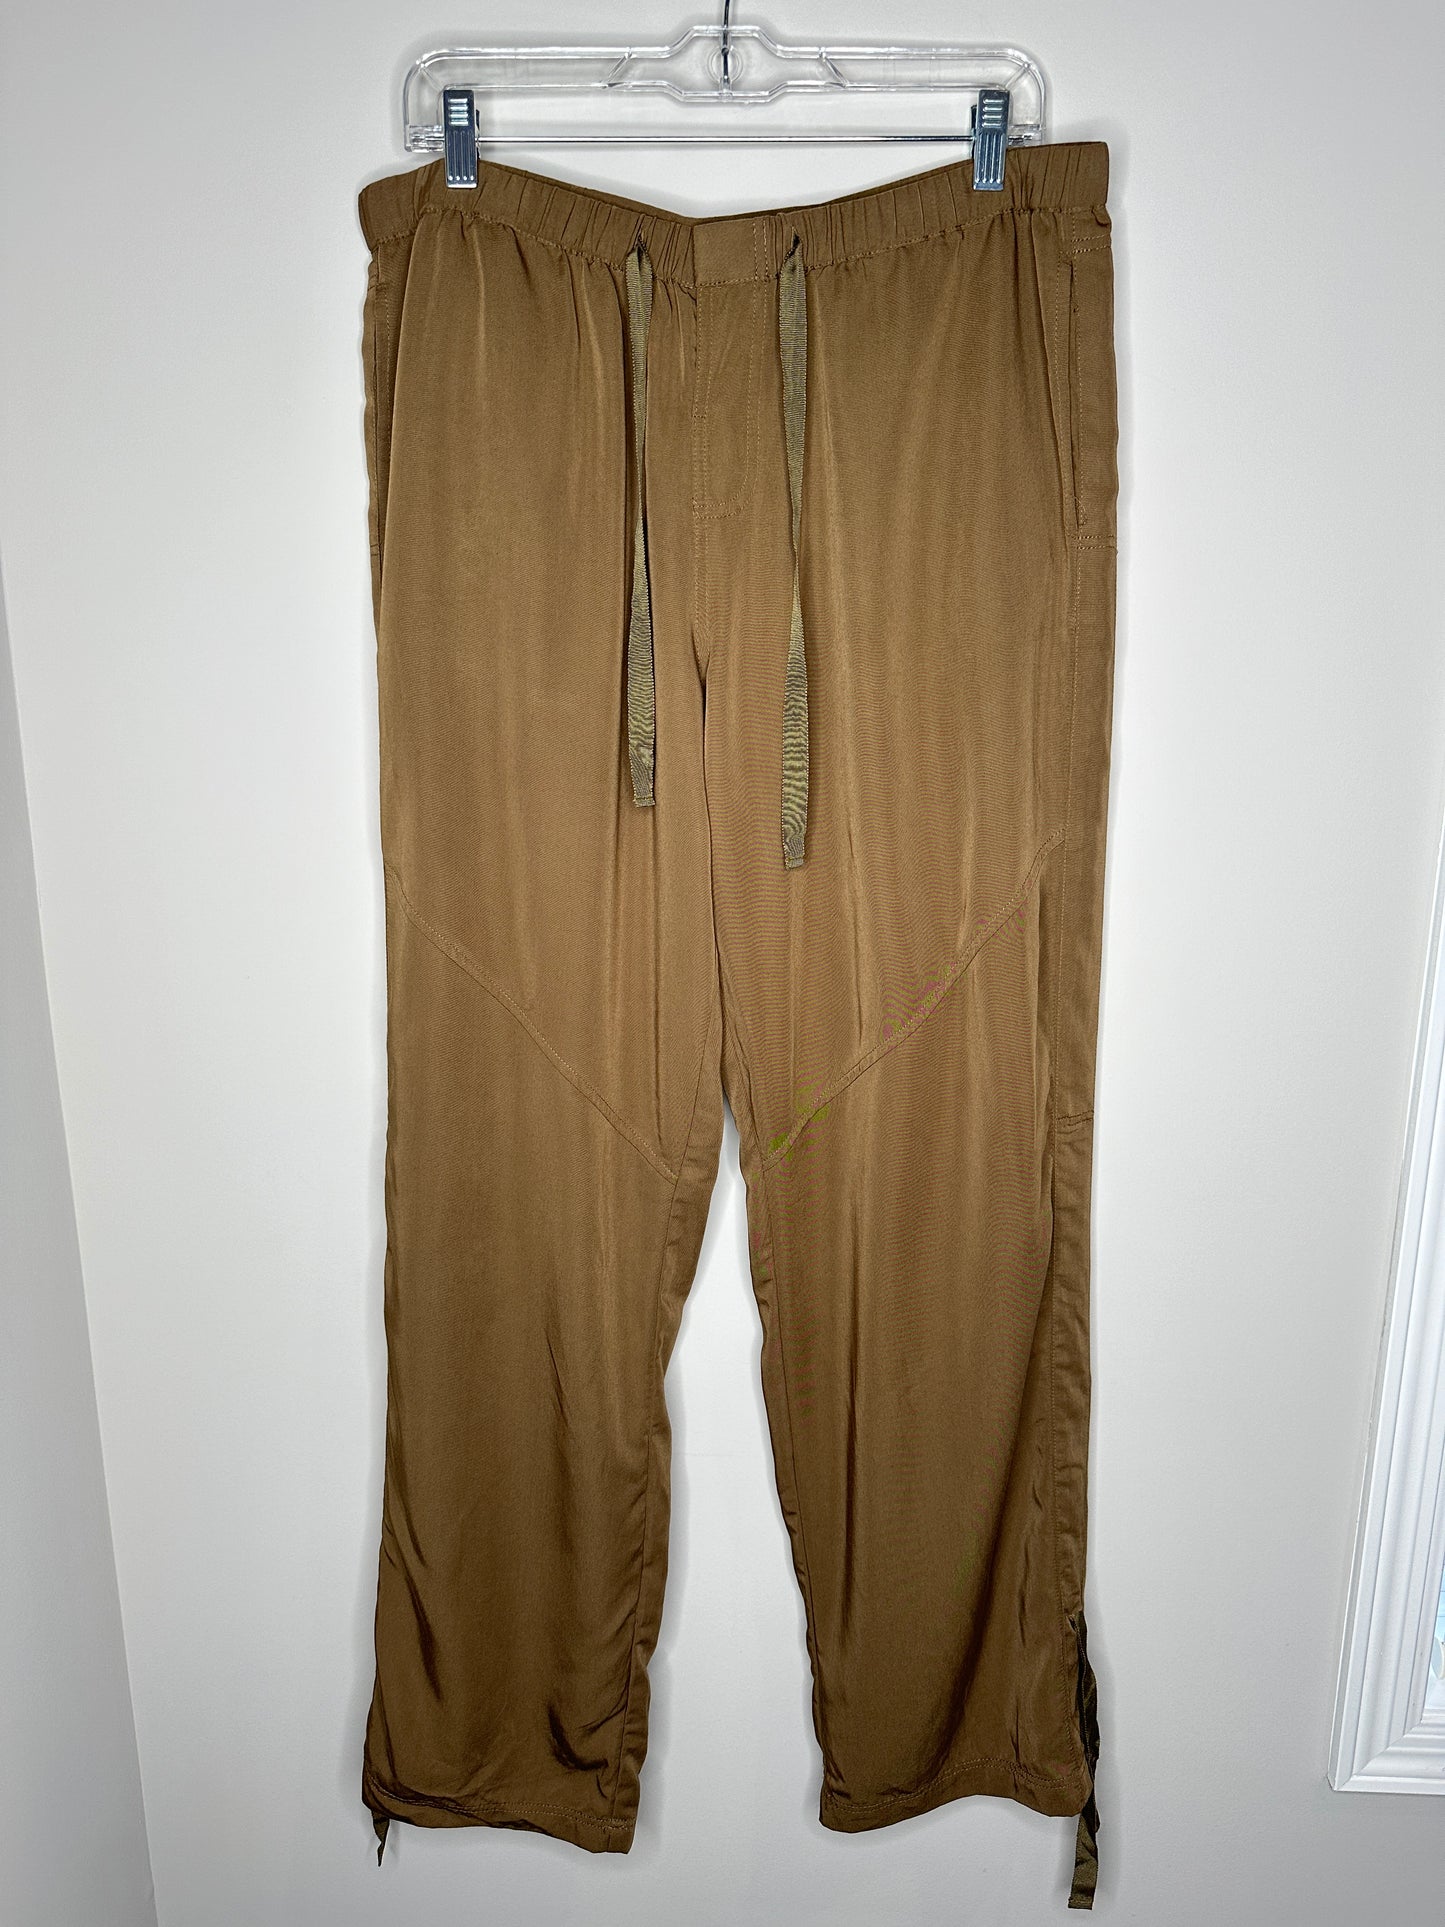 Belle Gray by Lisa Rinna Size L Taupe Light Brown Elastic Waist Pants